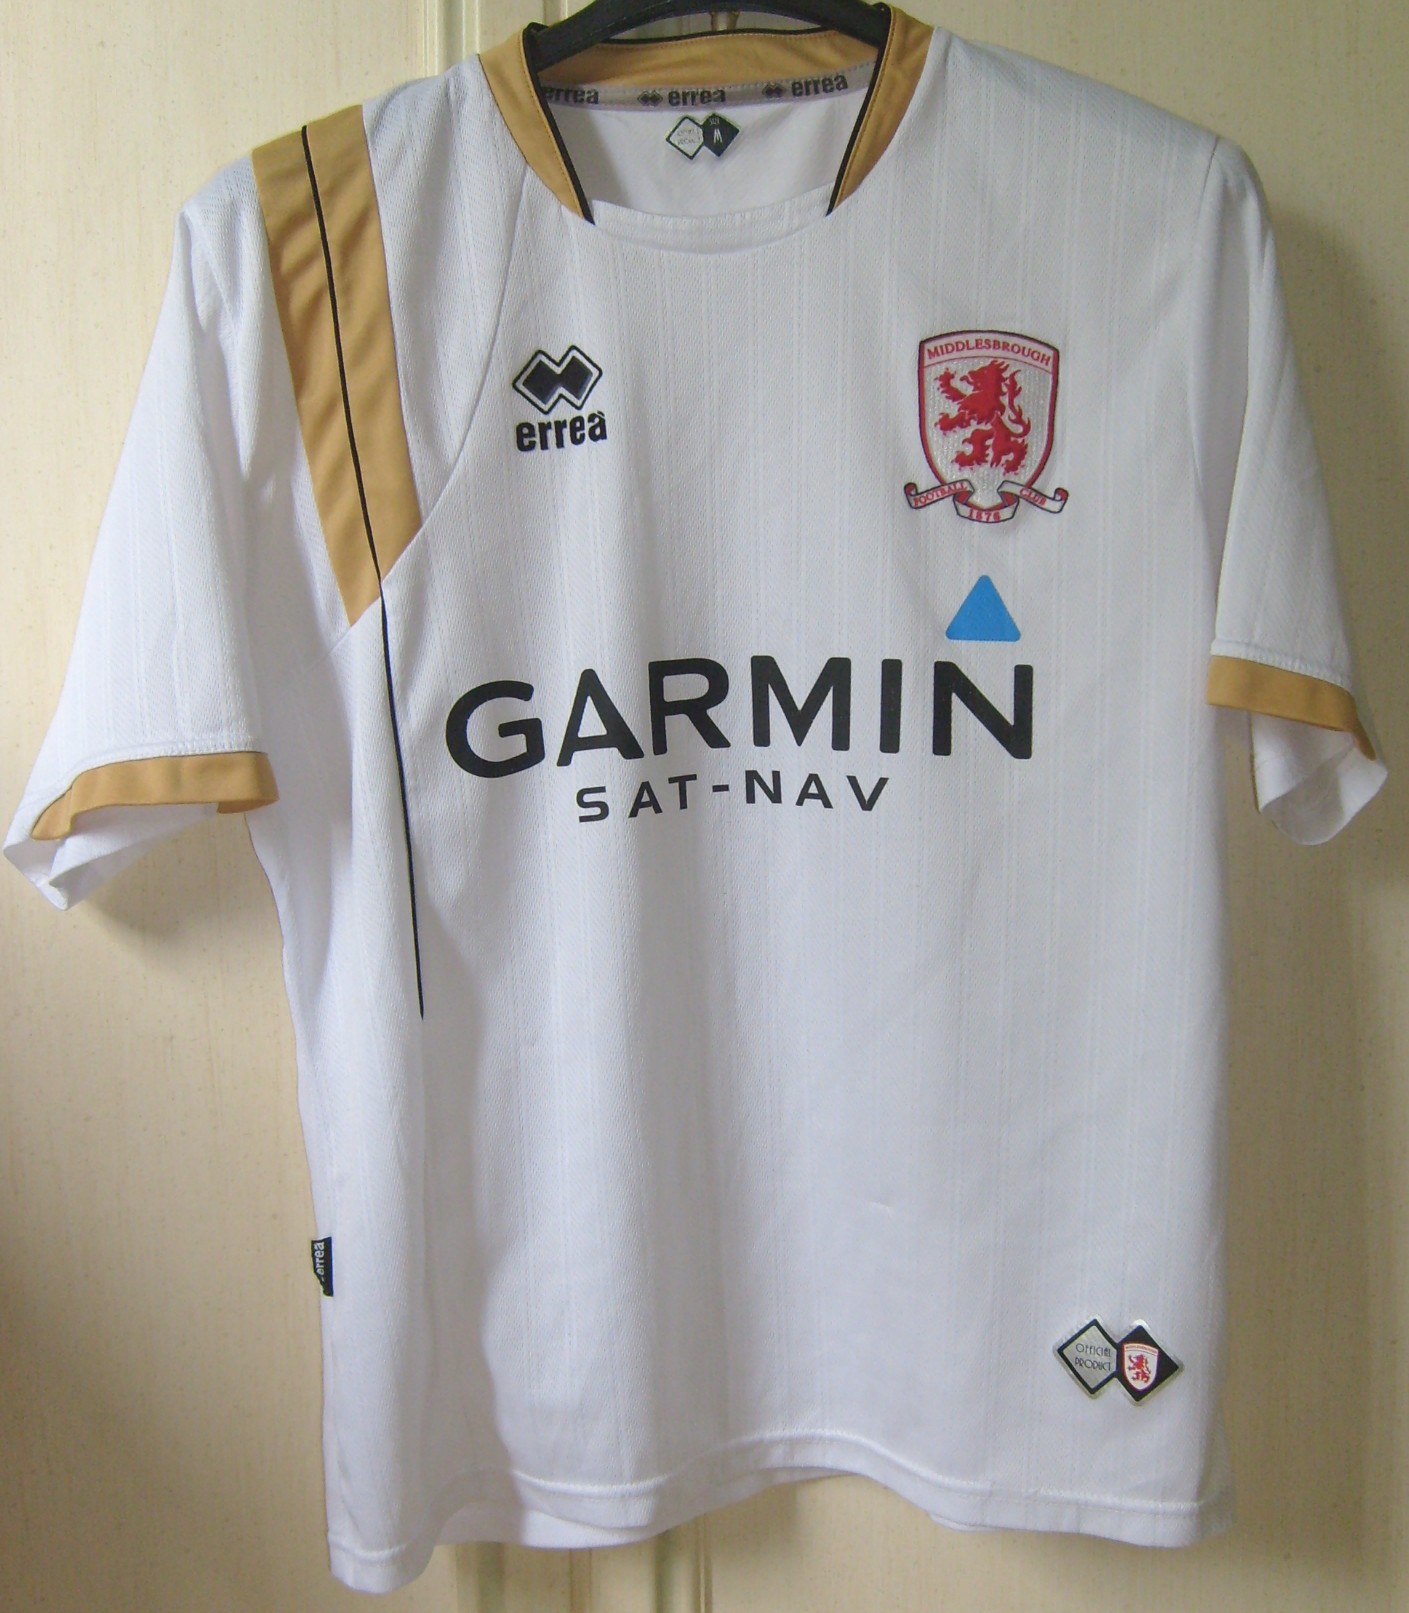 MIDDLESBROUGH WHITE 0708 - M